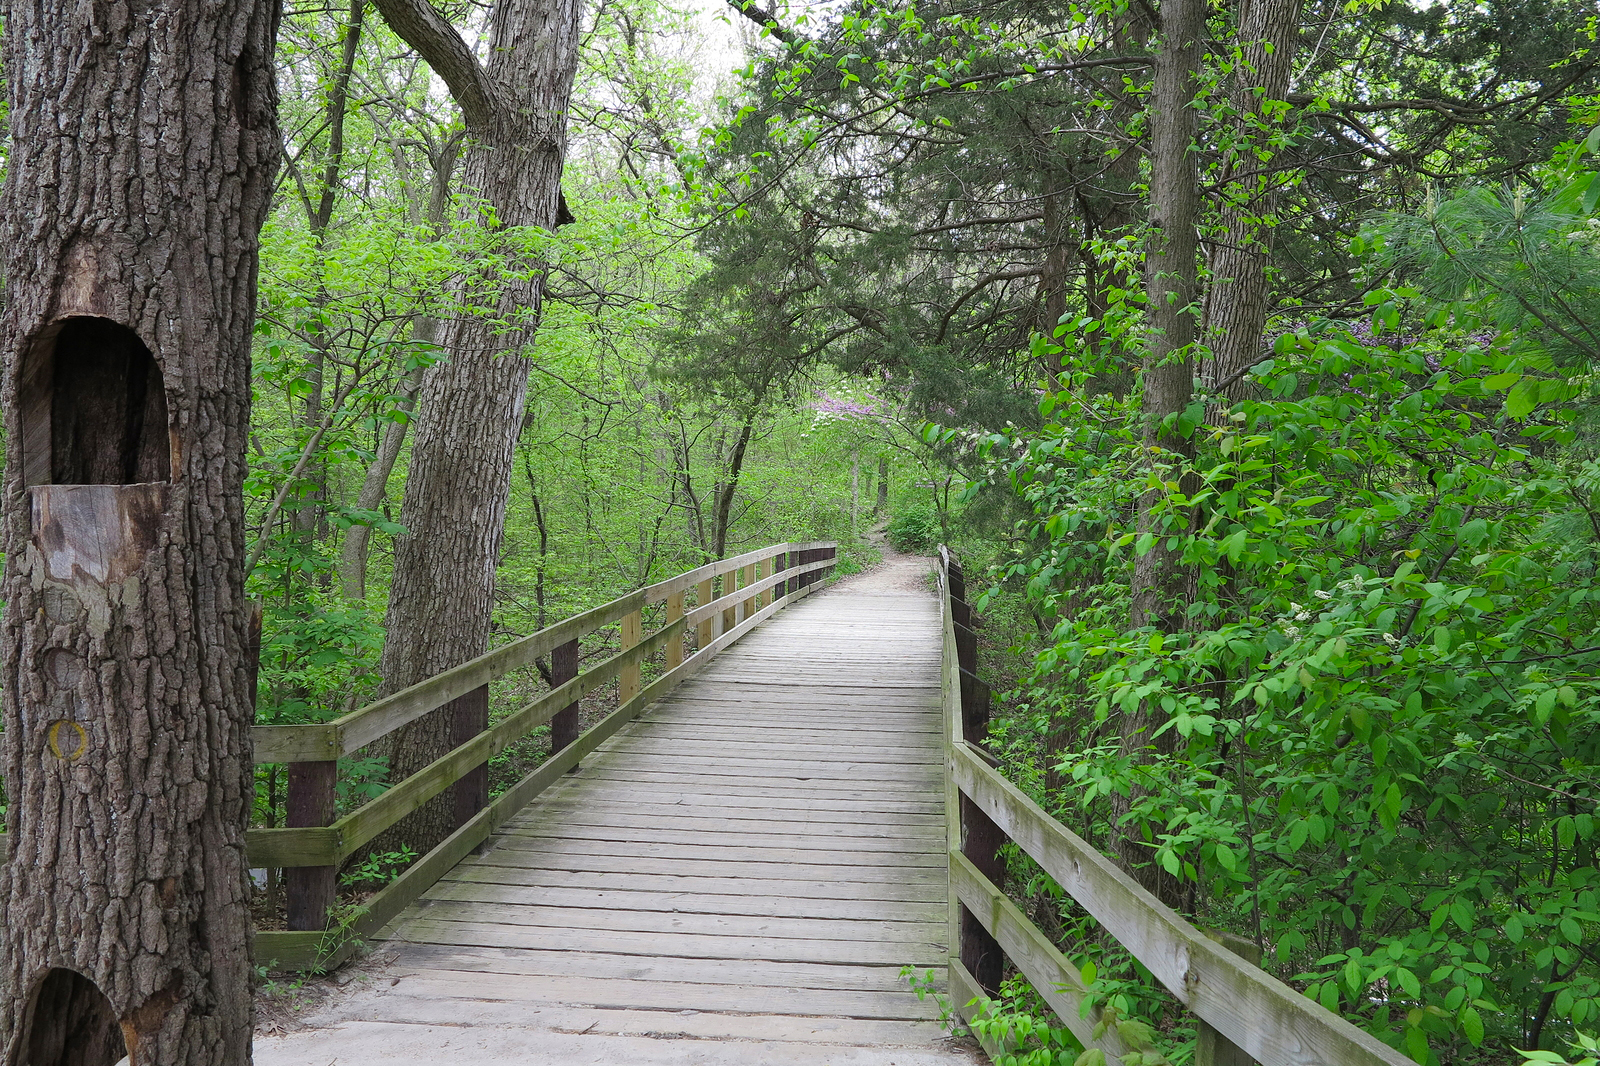 Starved Rock State Park near Chicago, IL offers a beautiful and serene hike that anyone would enjoy.